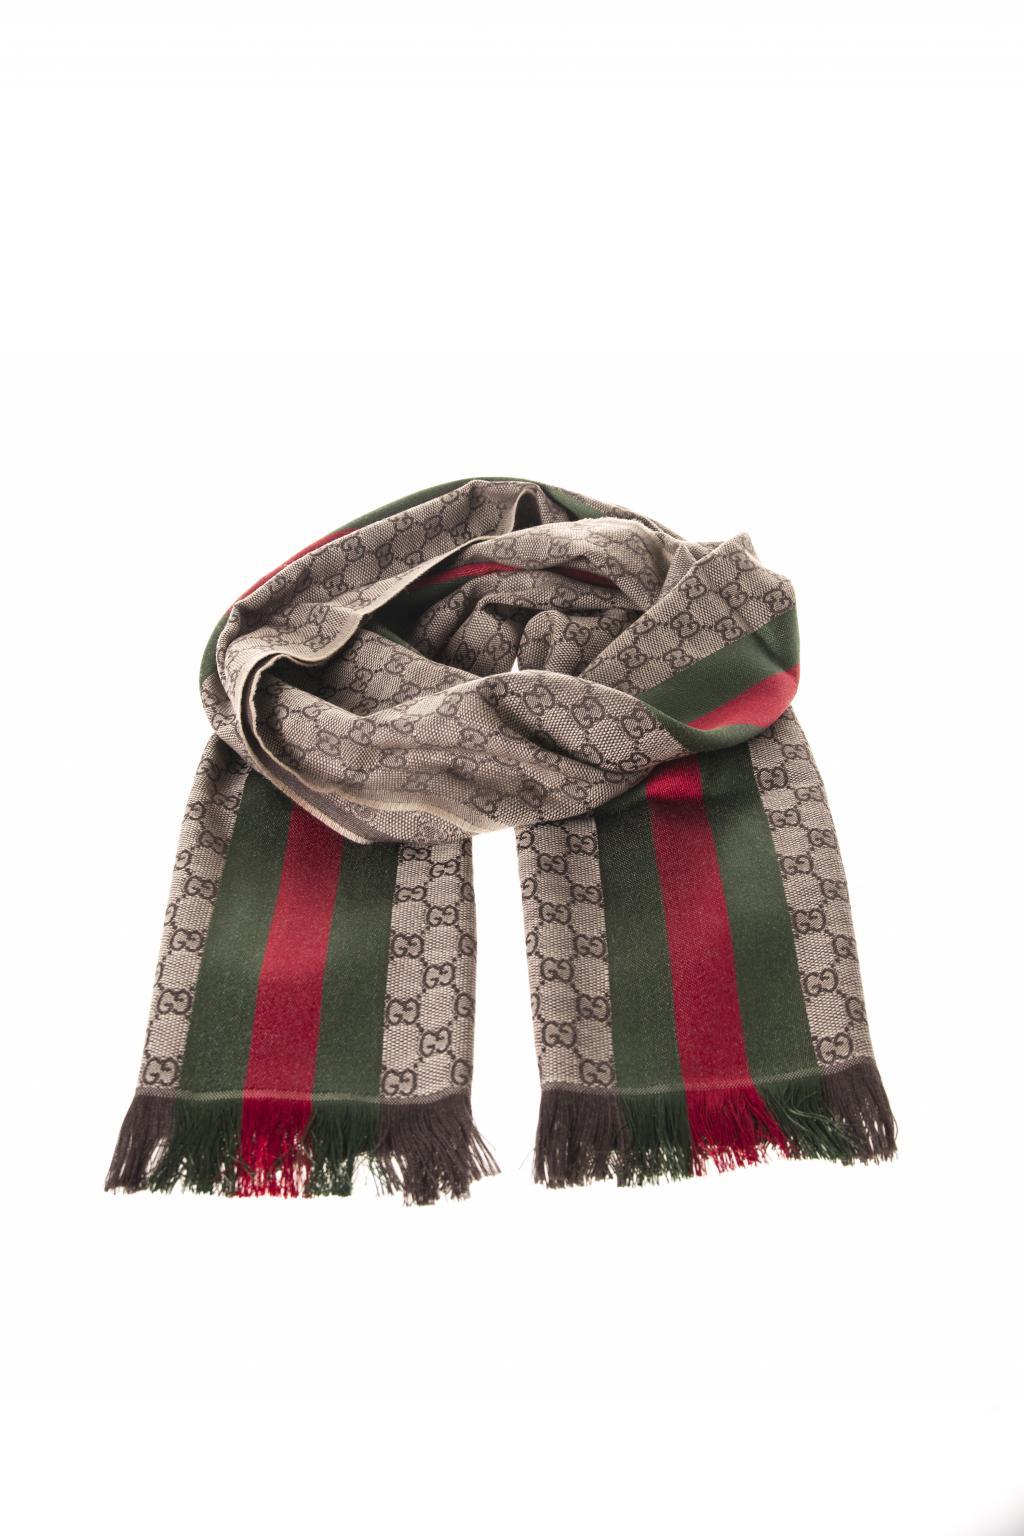 Gucci Wool 'GG' Pattern Scarf in Brown for Men - Lyst